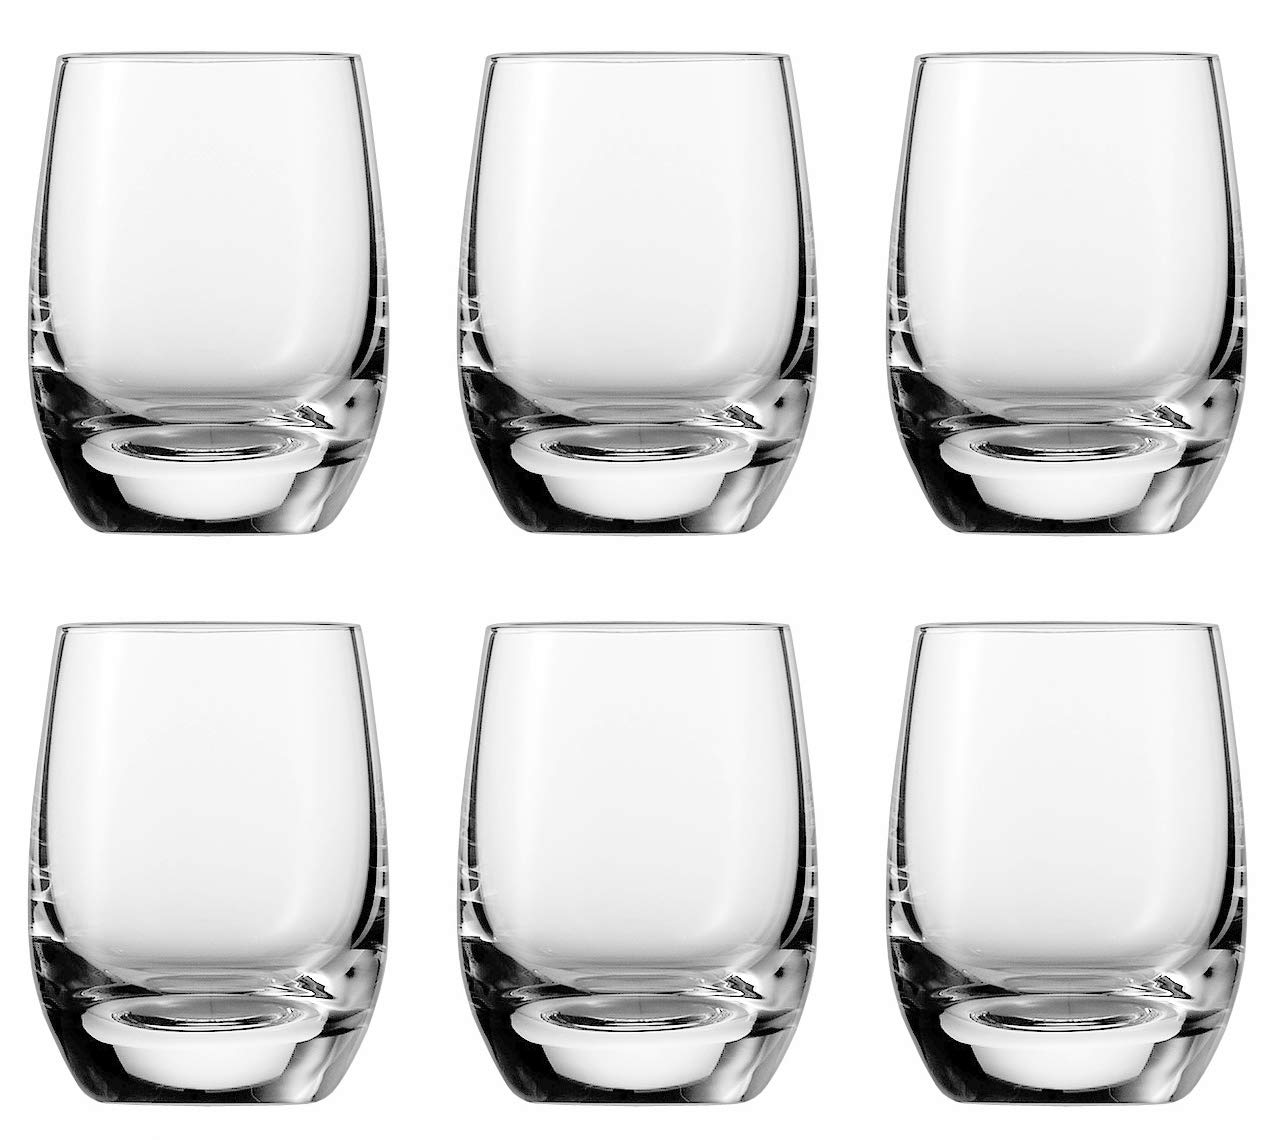 Schott Zwiesel Banquet Glass Collection - Shot Glass, 0.08 L, Pack of 6 - Elegant, Noble, for Everyday Use